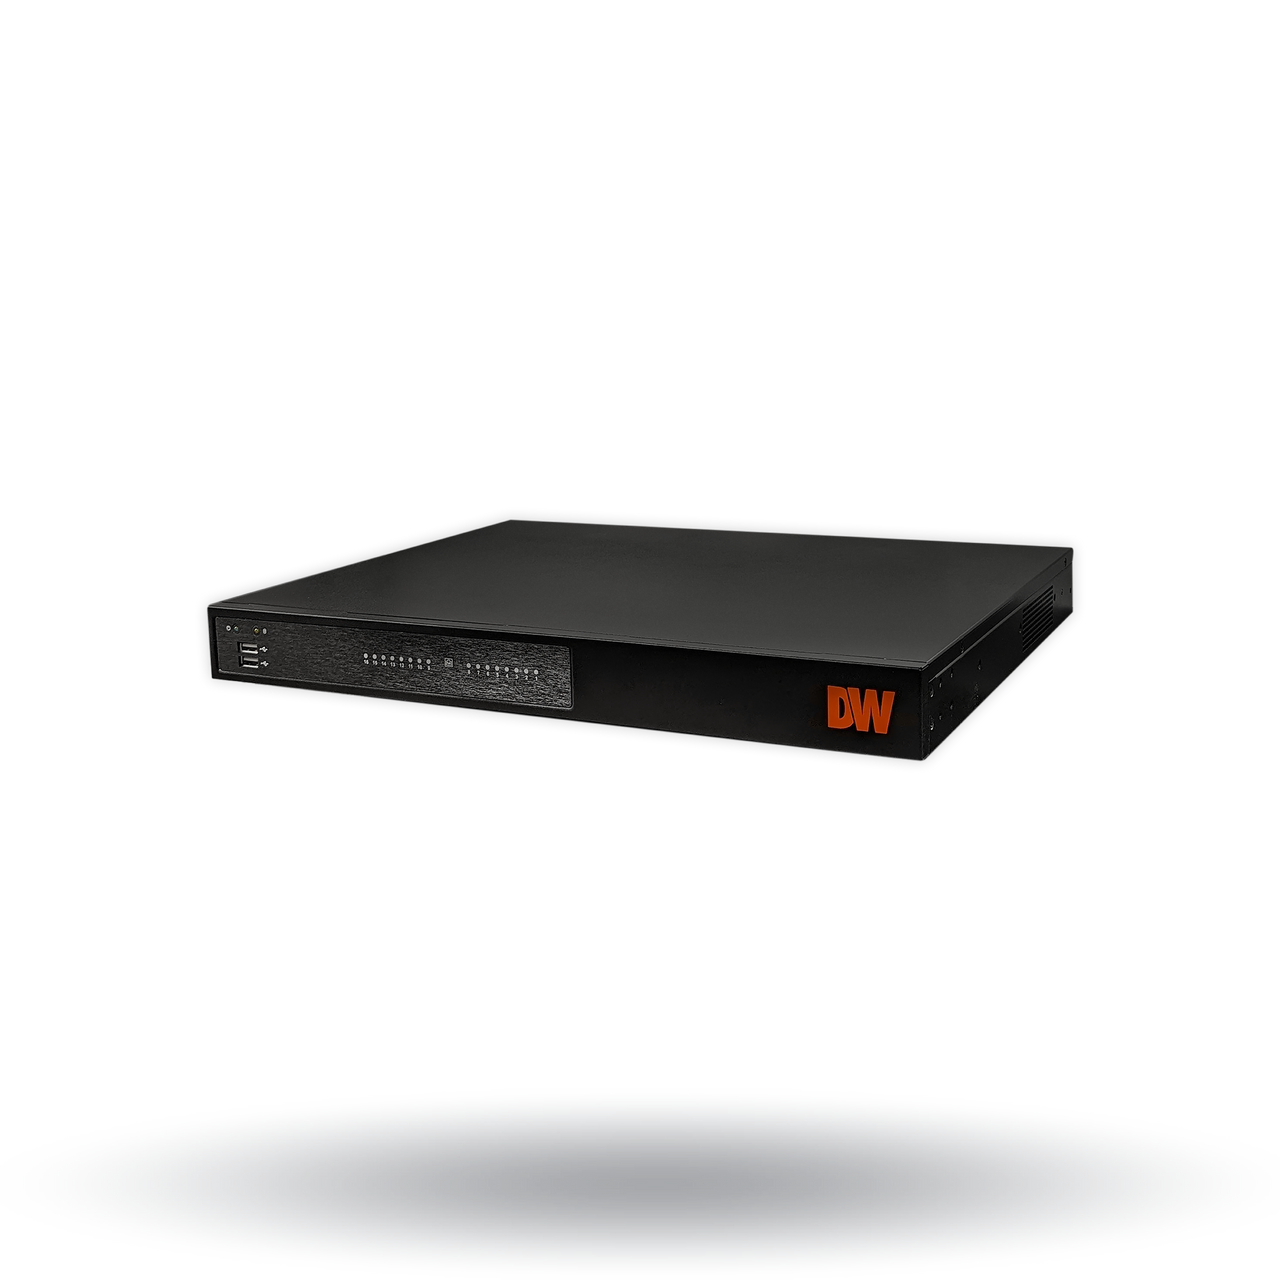 Digital Watchdog DW-BJCX40T-LX 24-Channel 80Mbps NVR with 16 PoE Ports, 40TB HDD